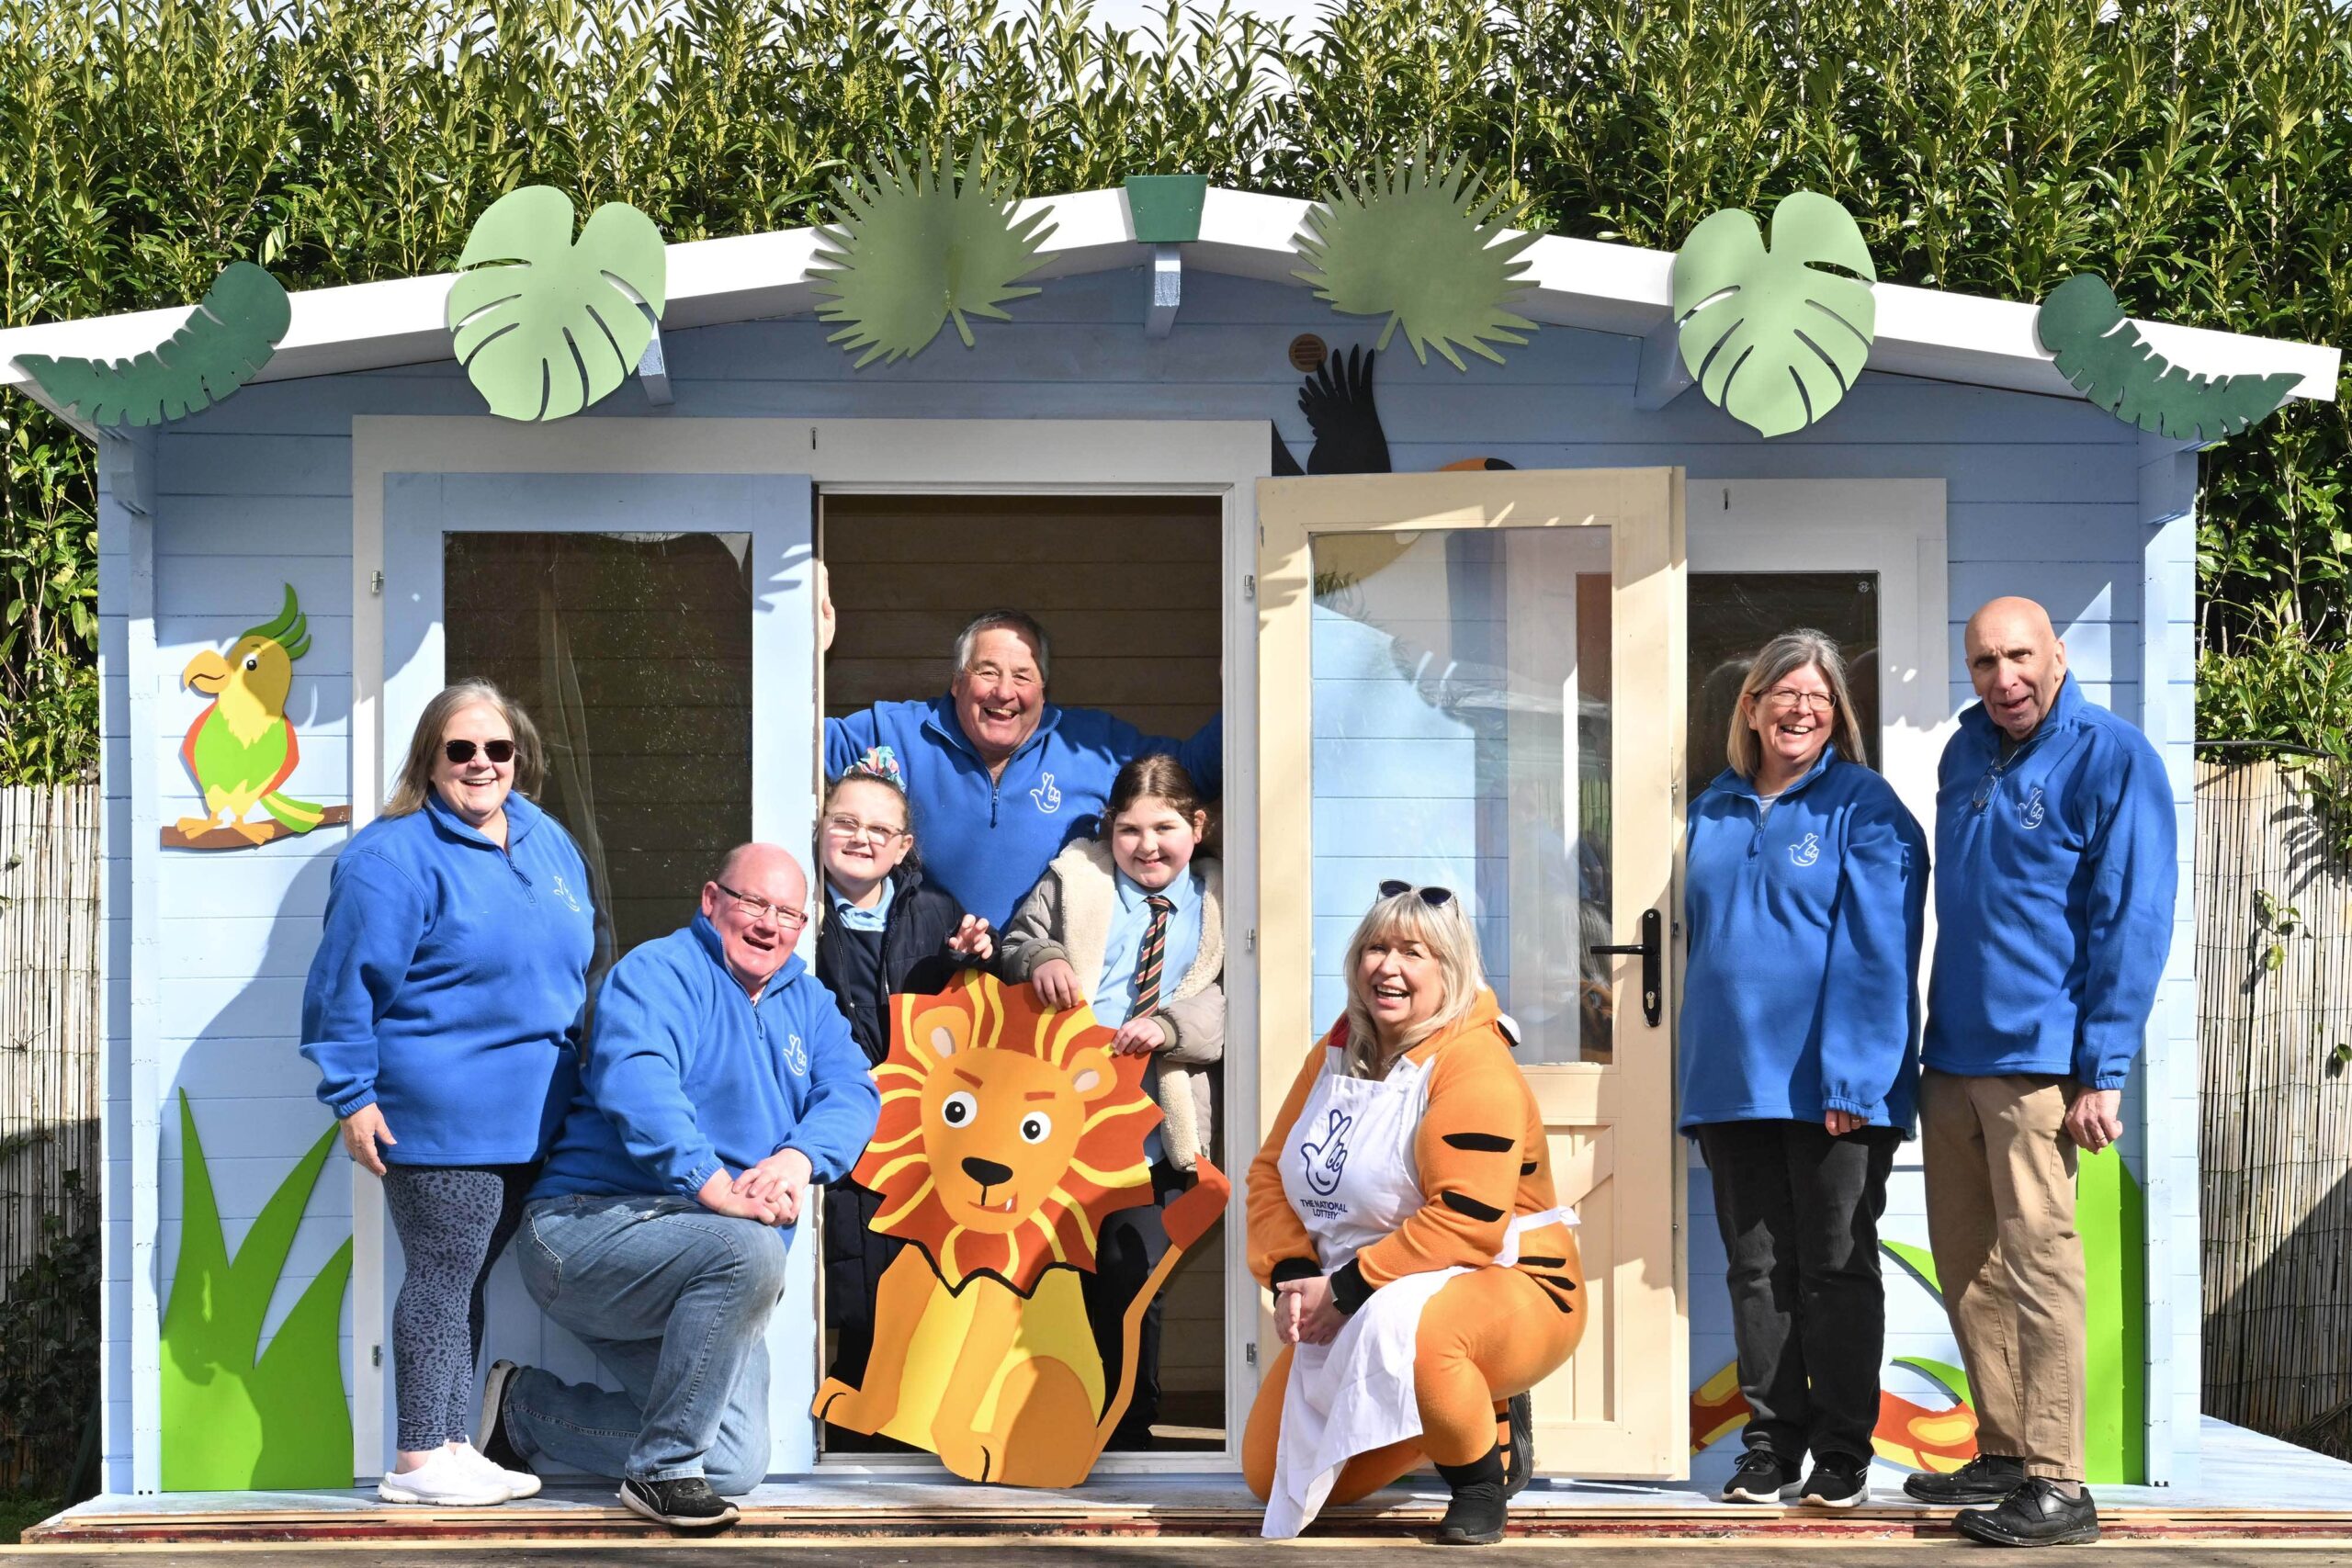 Lottery winners rebuild playhouse for disabled children destroyed by vandals